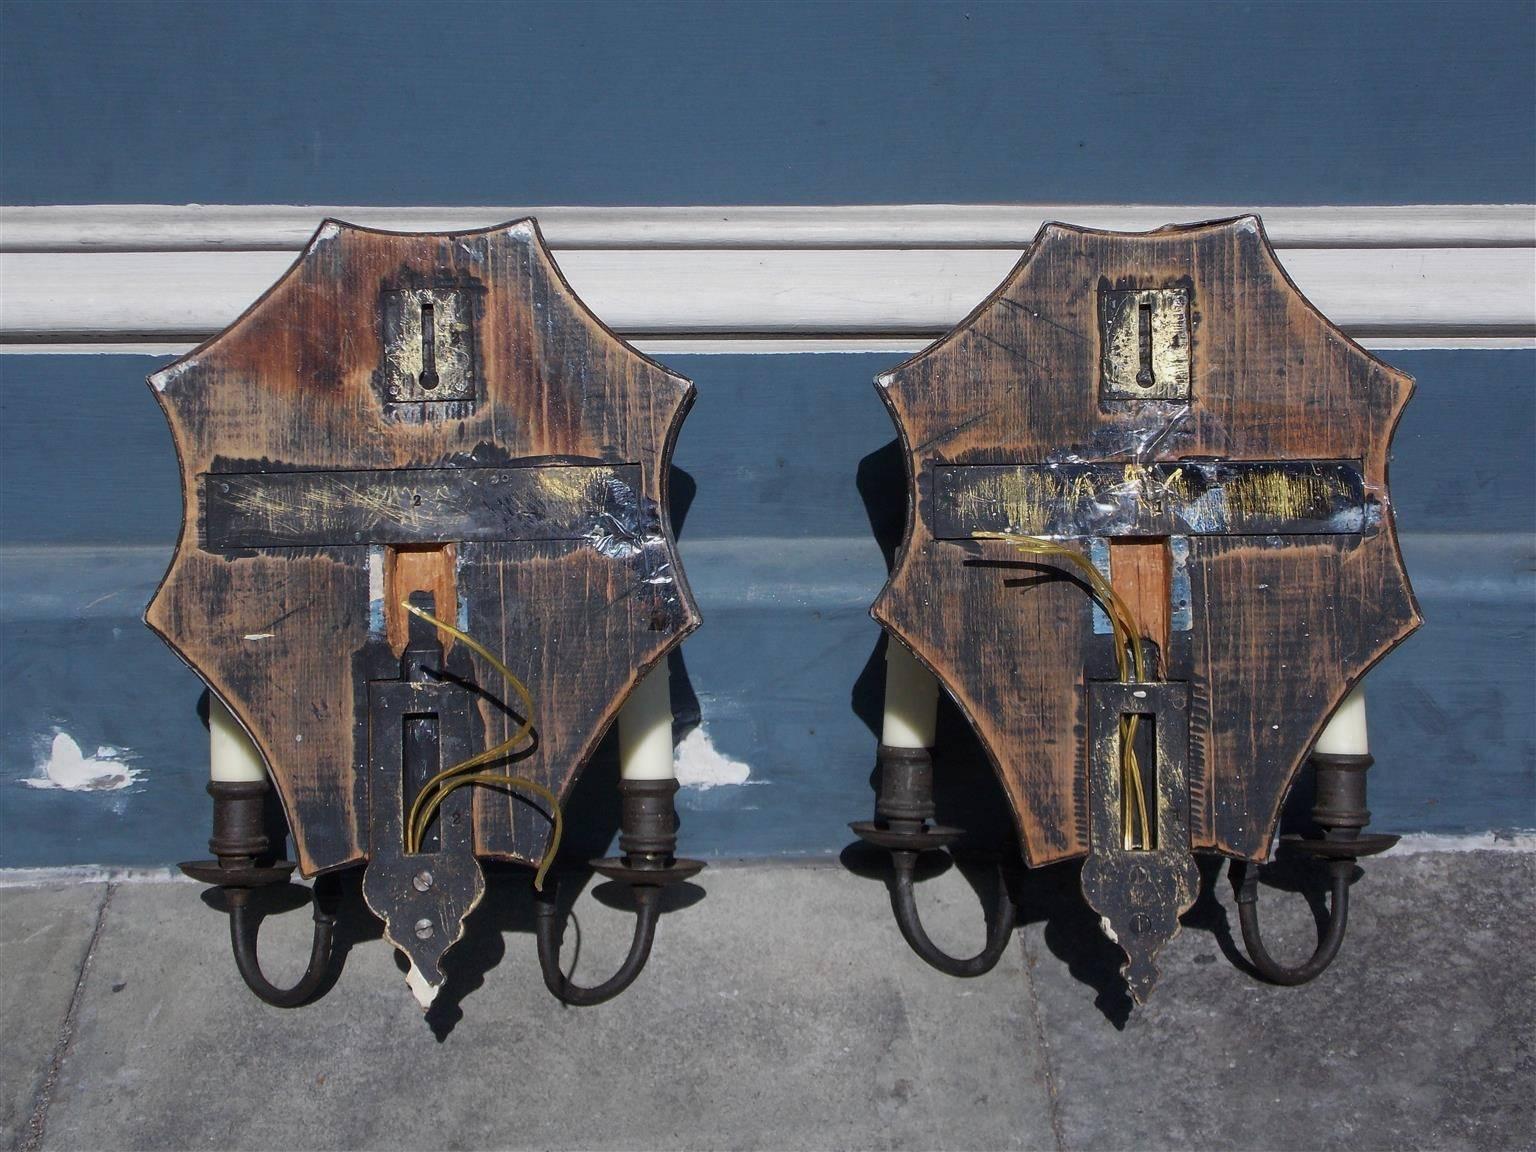 Pair of Venetian Bronze & Decorative Etched Mirrored Wall Sconces, C. 1800 For Sale 1